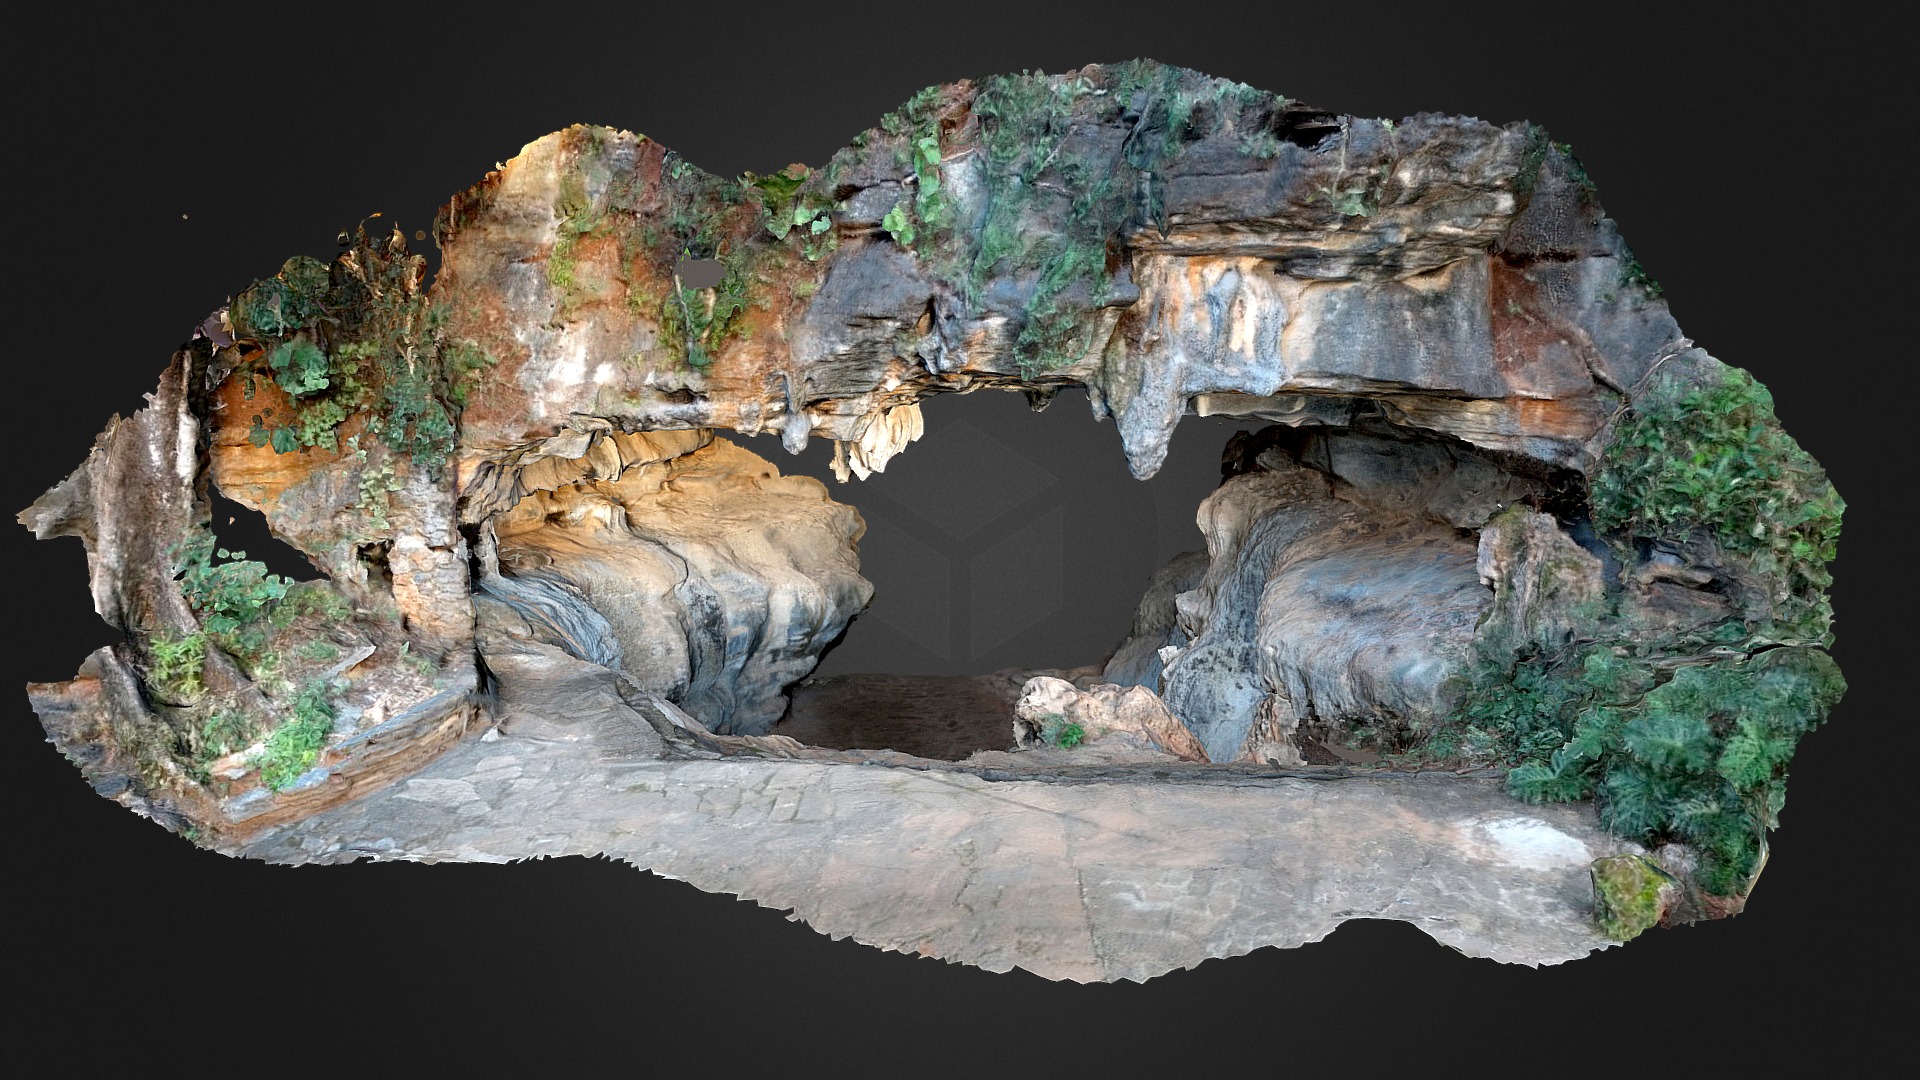 3D model Gruta da Lapinha - This is a 3D model of the Gruta da Lapinha. The 3D model is about a large rock formation.